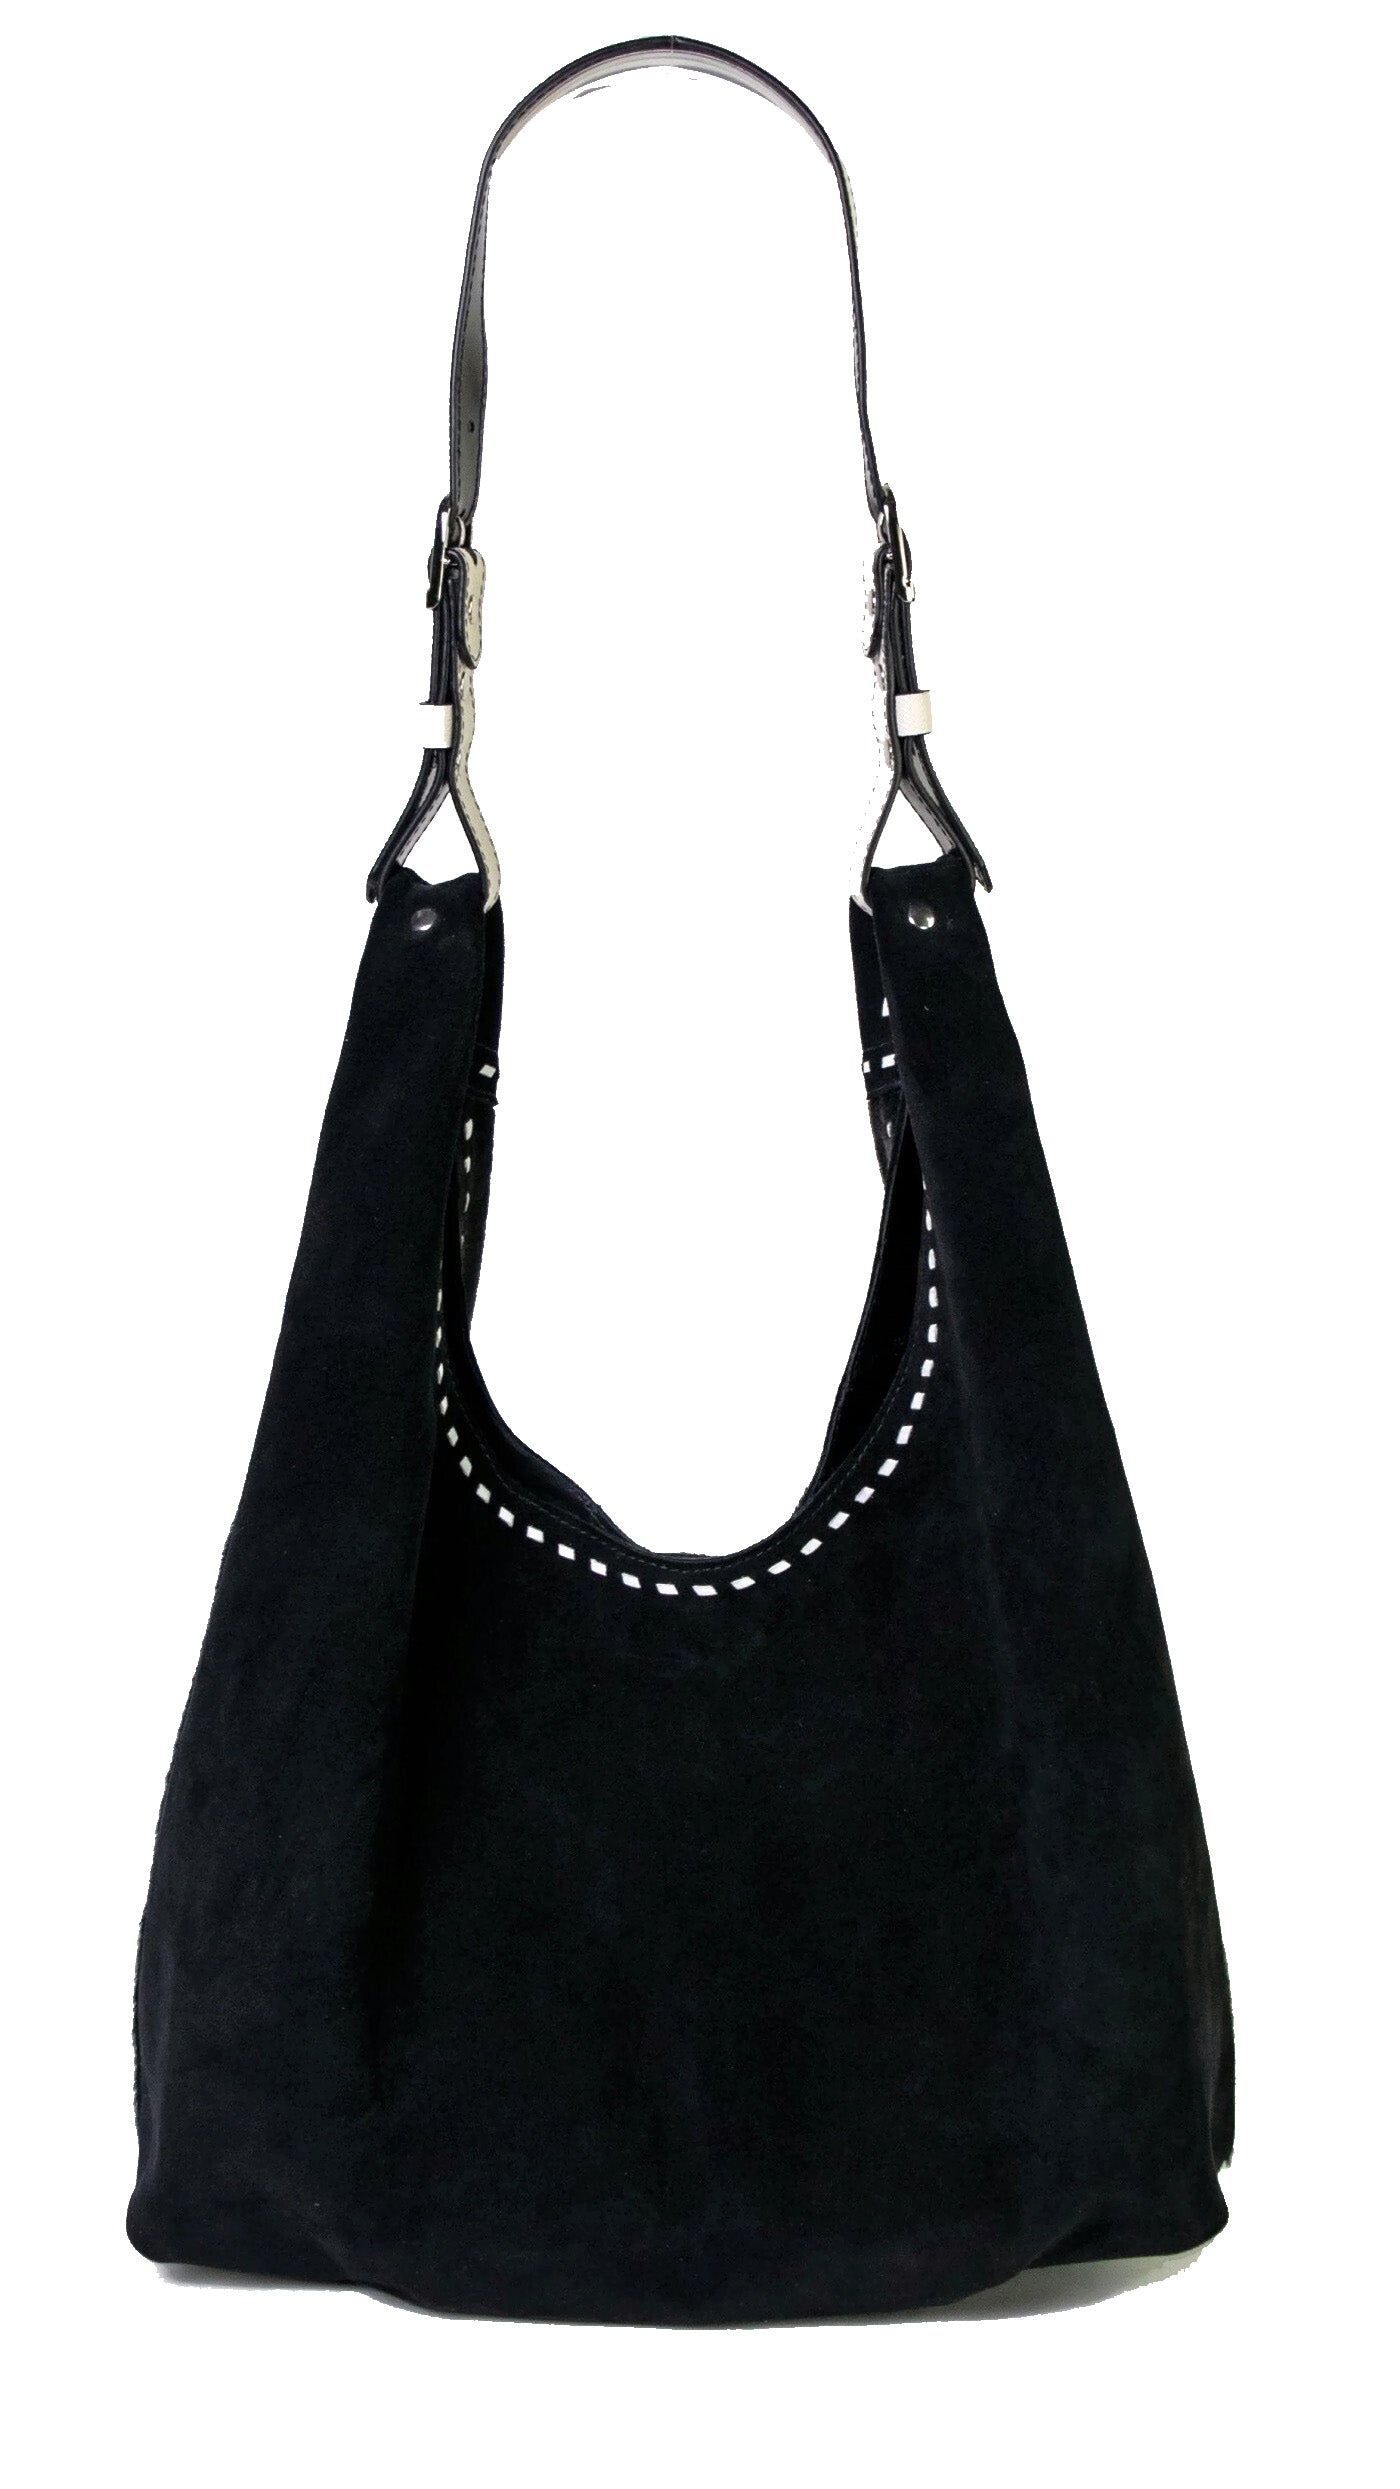 Back of Leather hobo shoulder bag in jet black hair calf &amp; suede. Handcrafted by slow fashion indie designer Liv McClintock. Features hand laced white leather trim. Made in Wilmington Delaware USA.